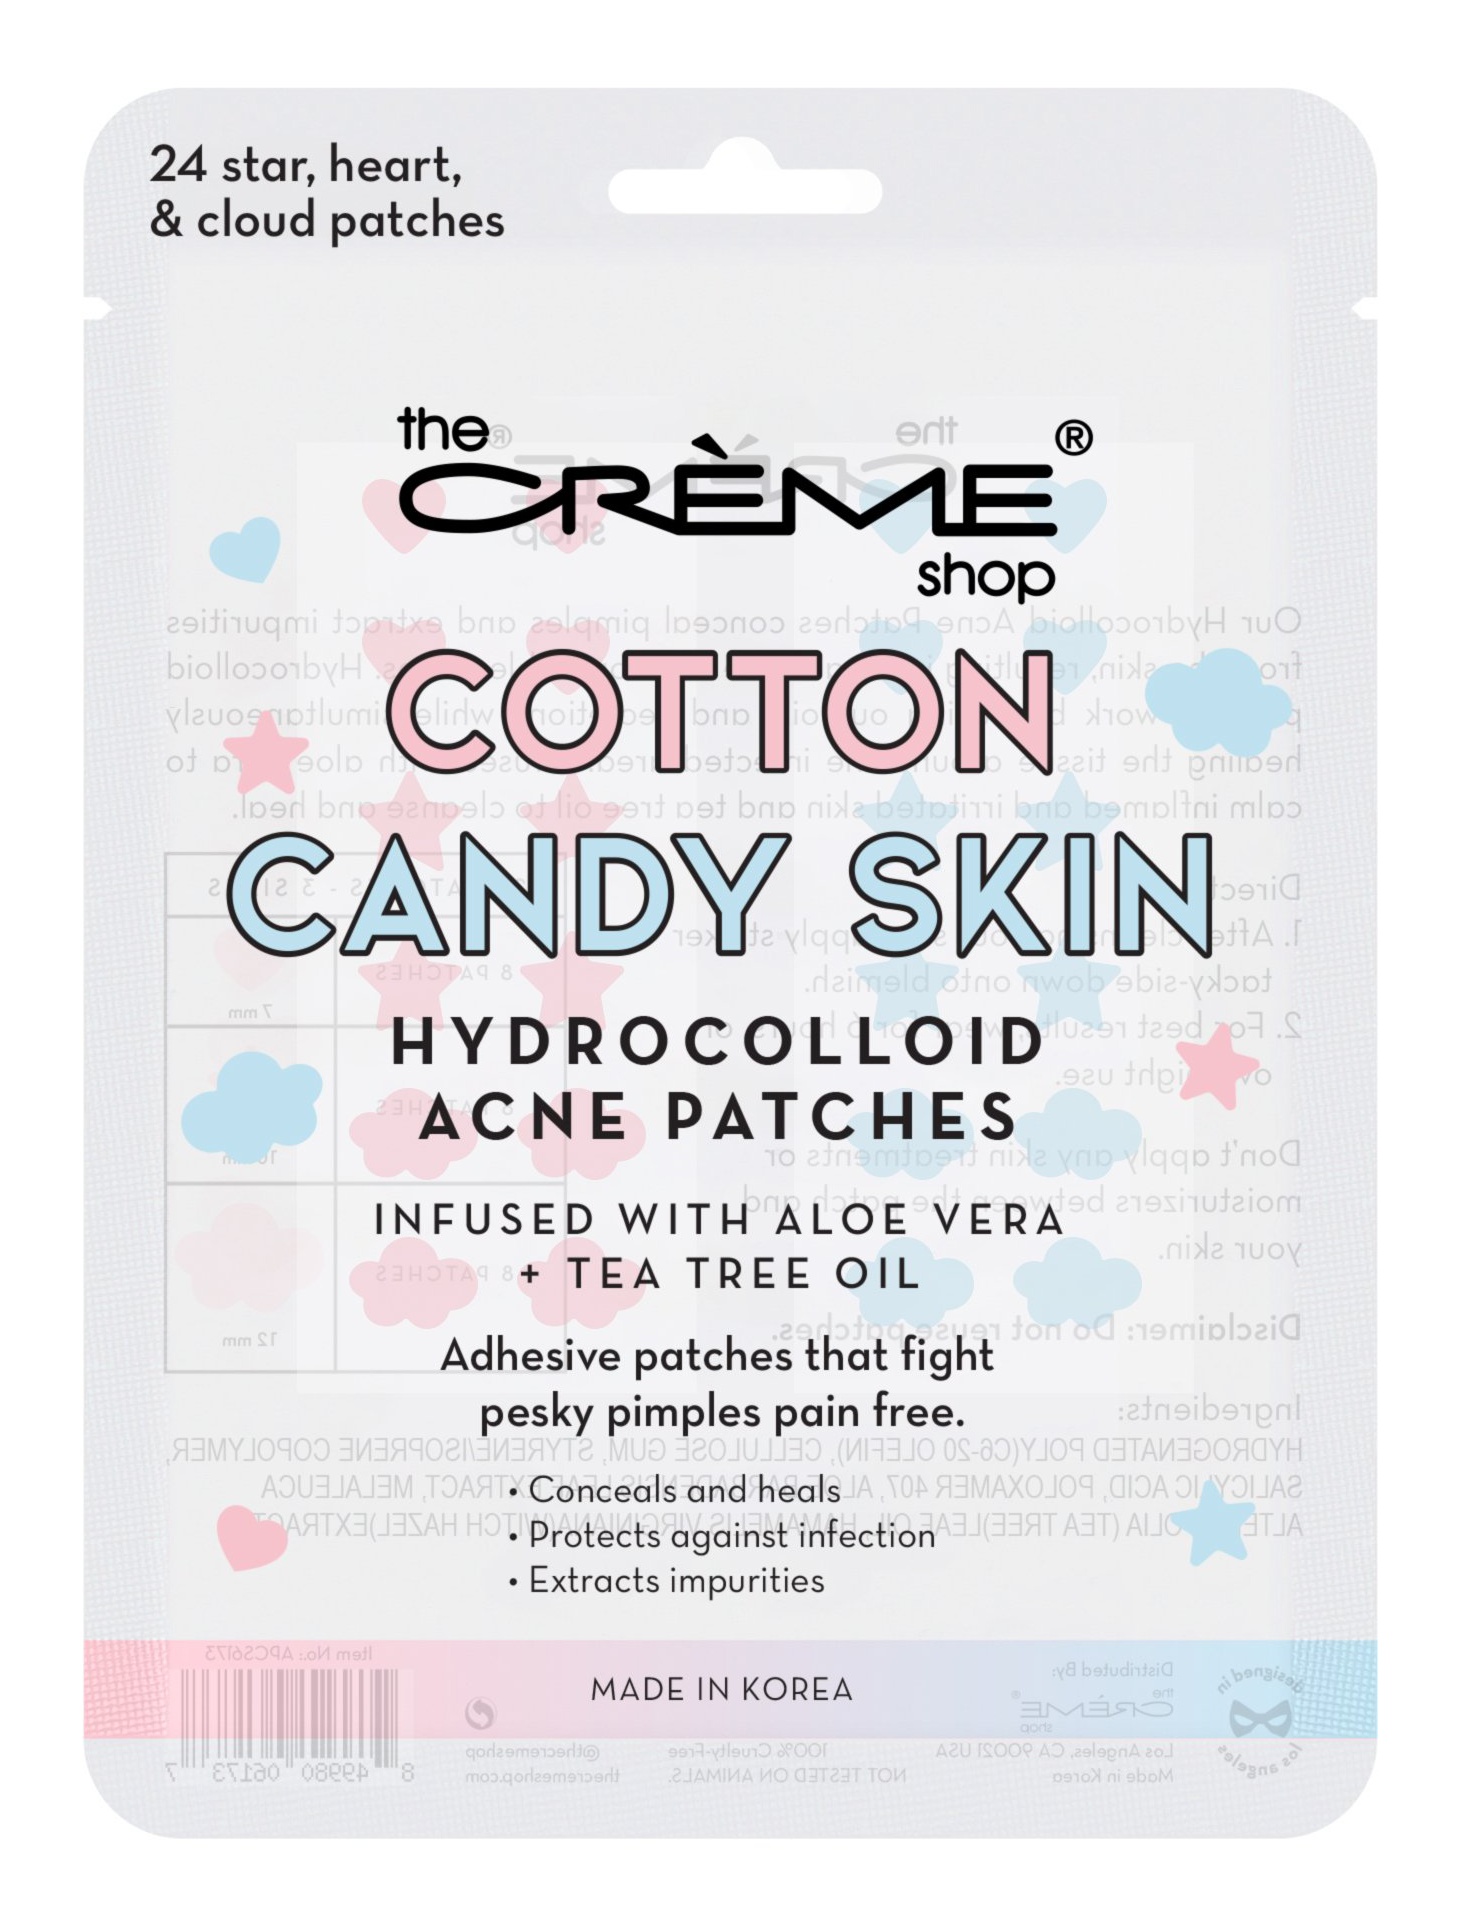 The Creme Shop Cotton Candy Skin Hydrocolloid Acne Patches